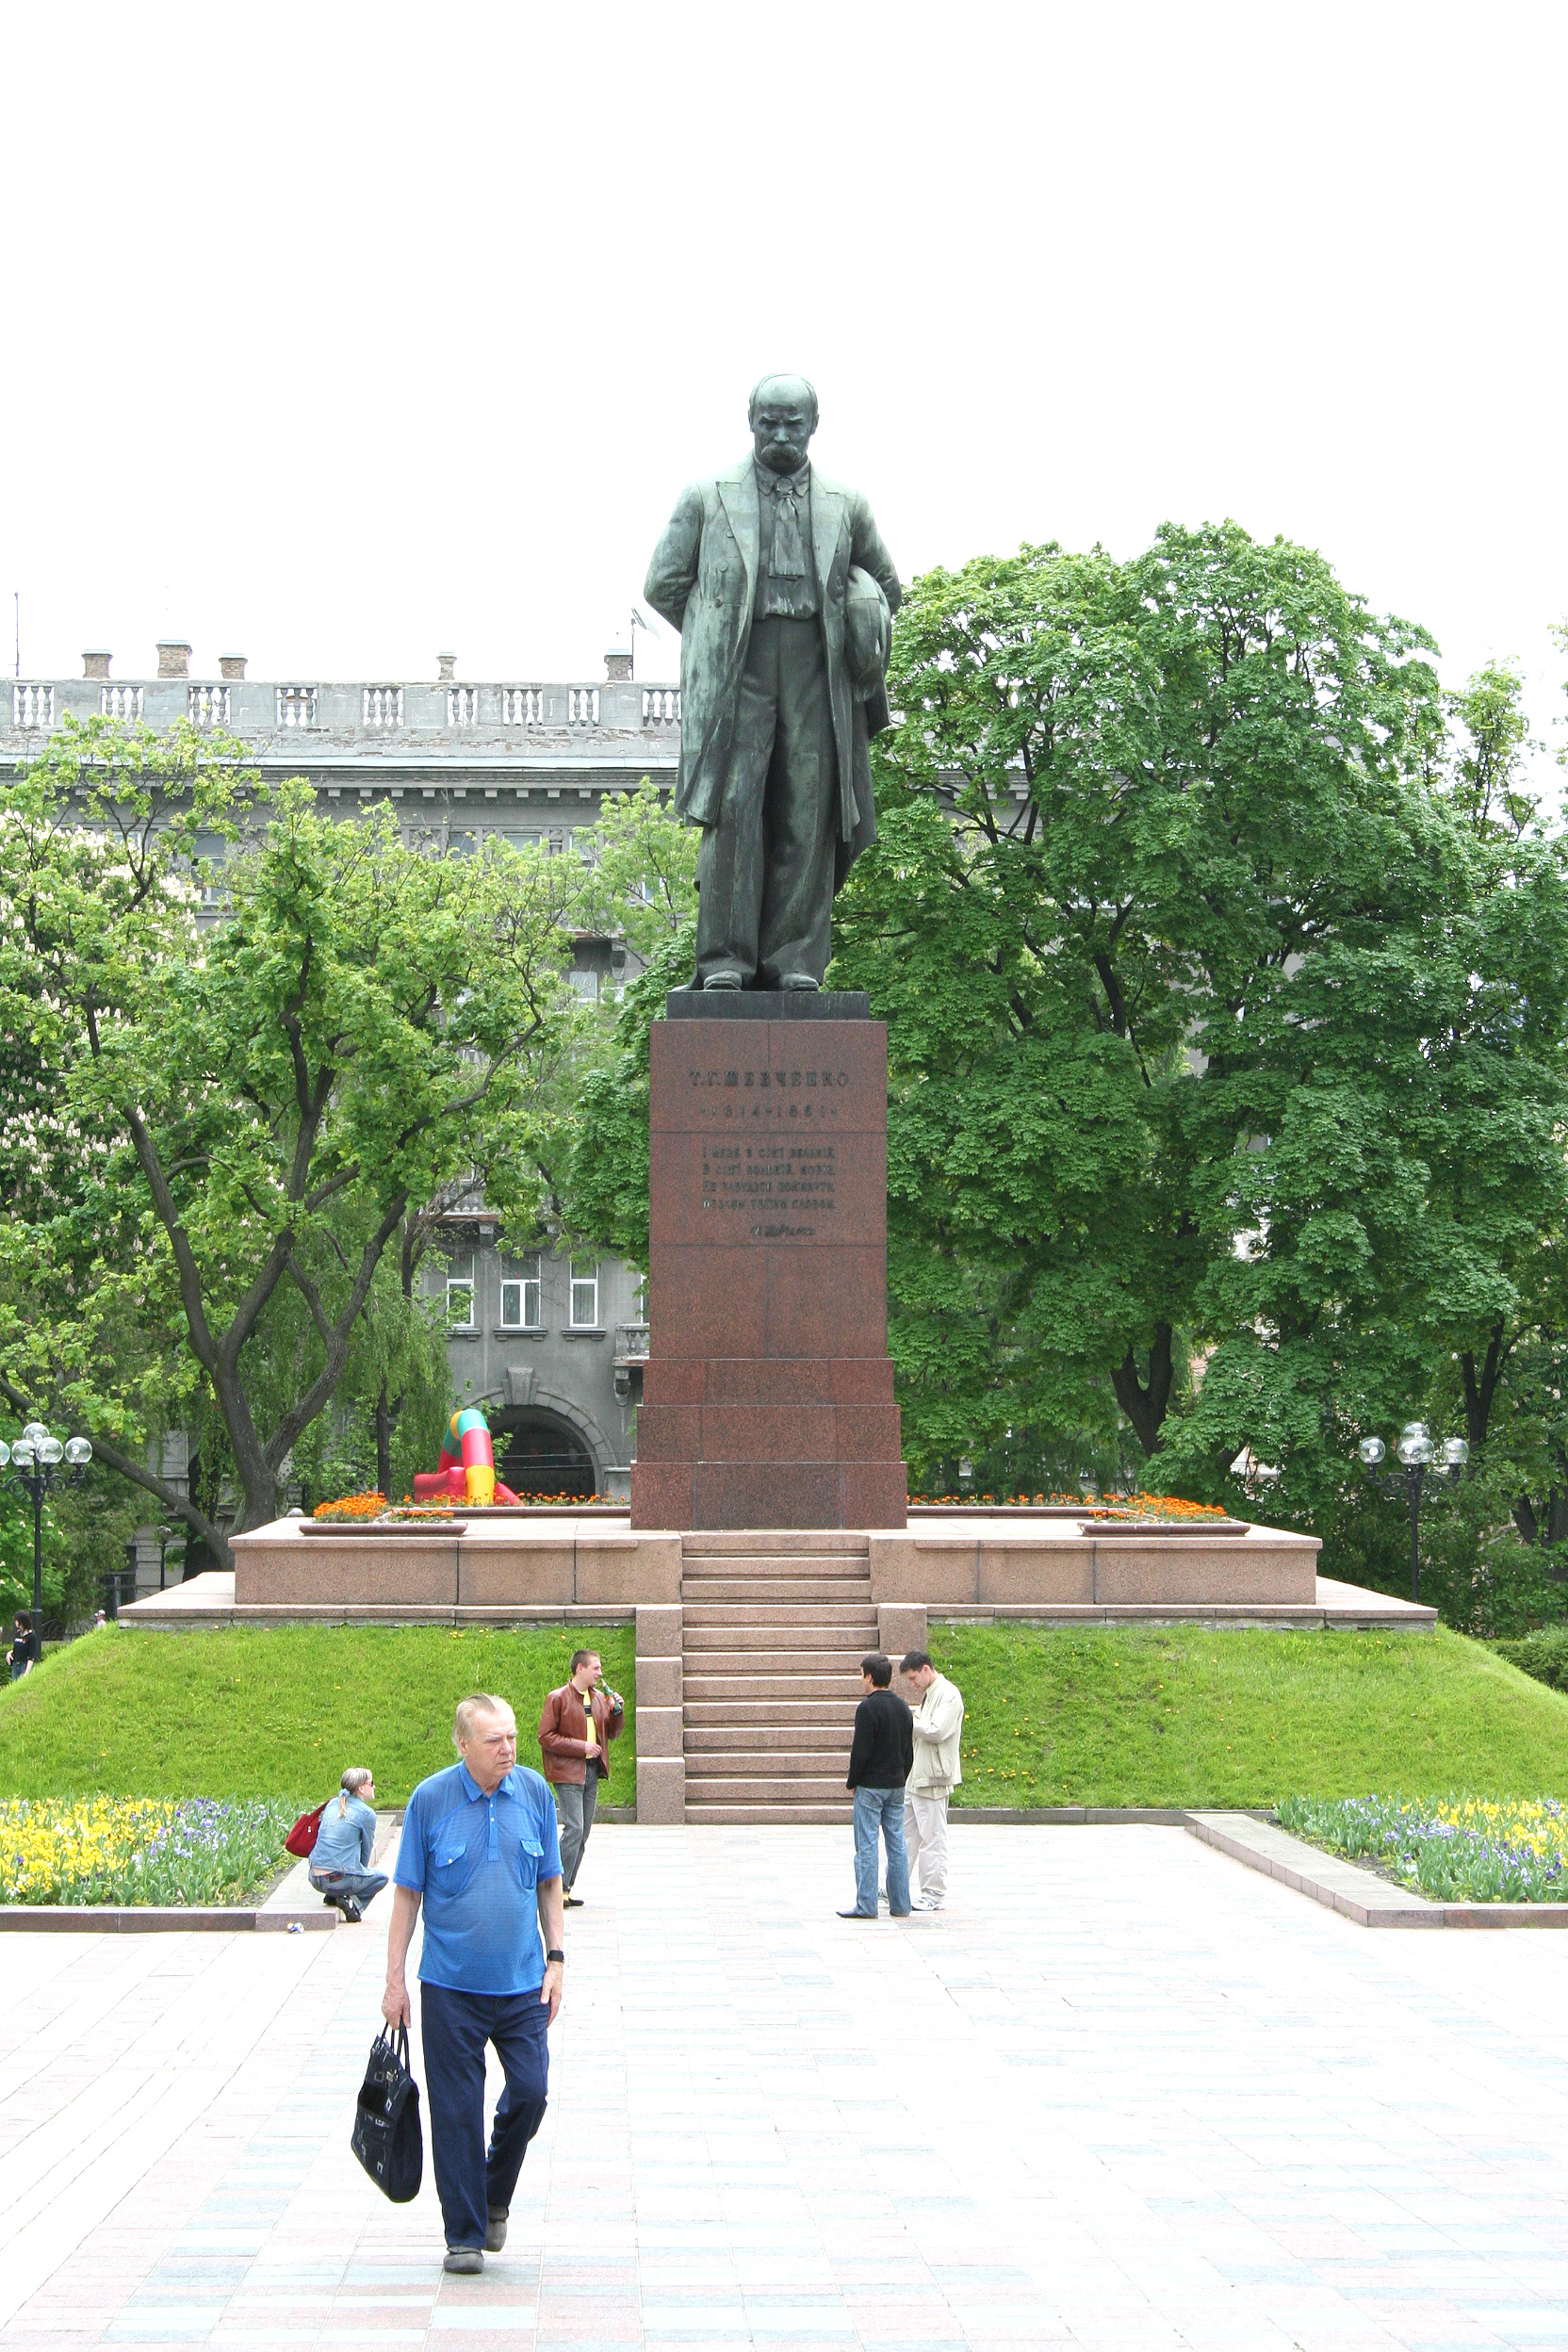 Monument to Taras Shevchenko (1814-1861) who was Ukraines national poet and a famous artist.